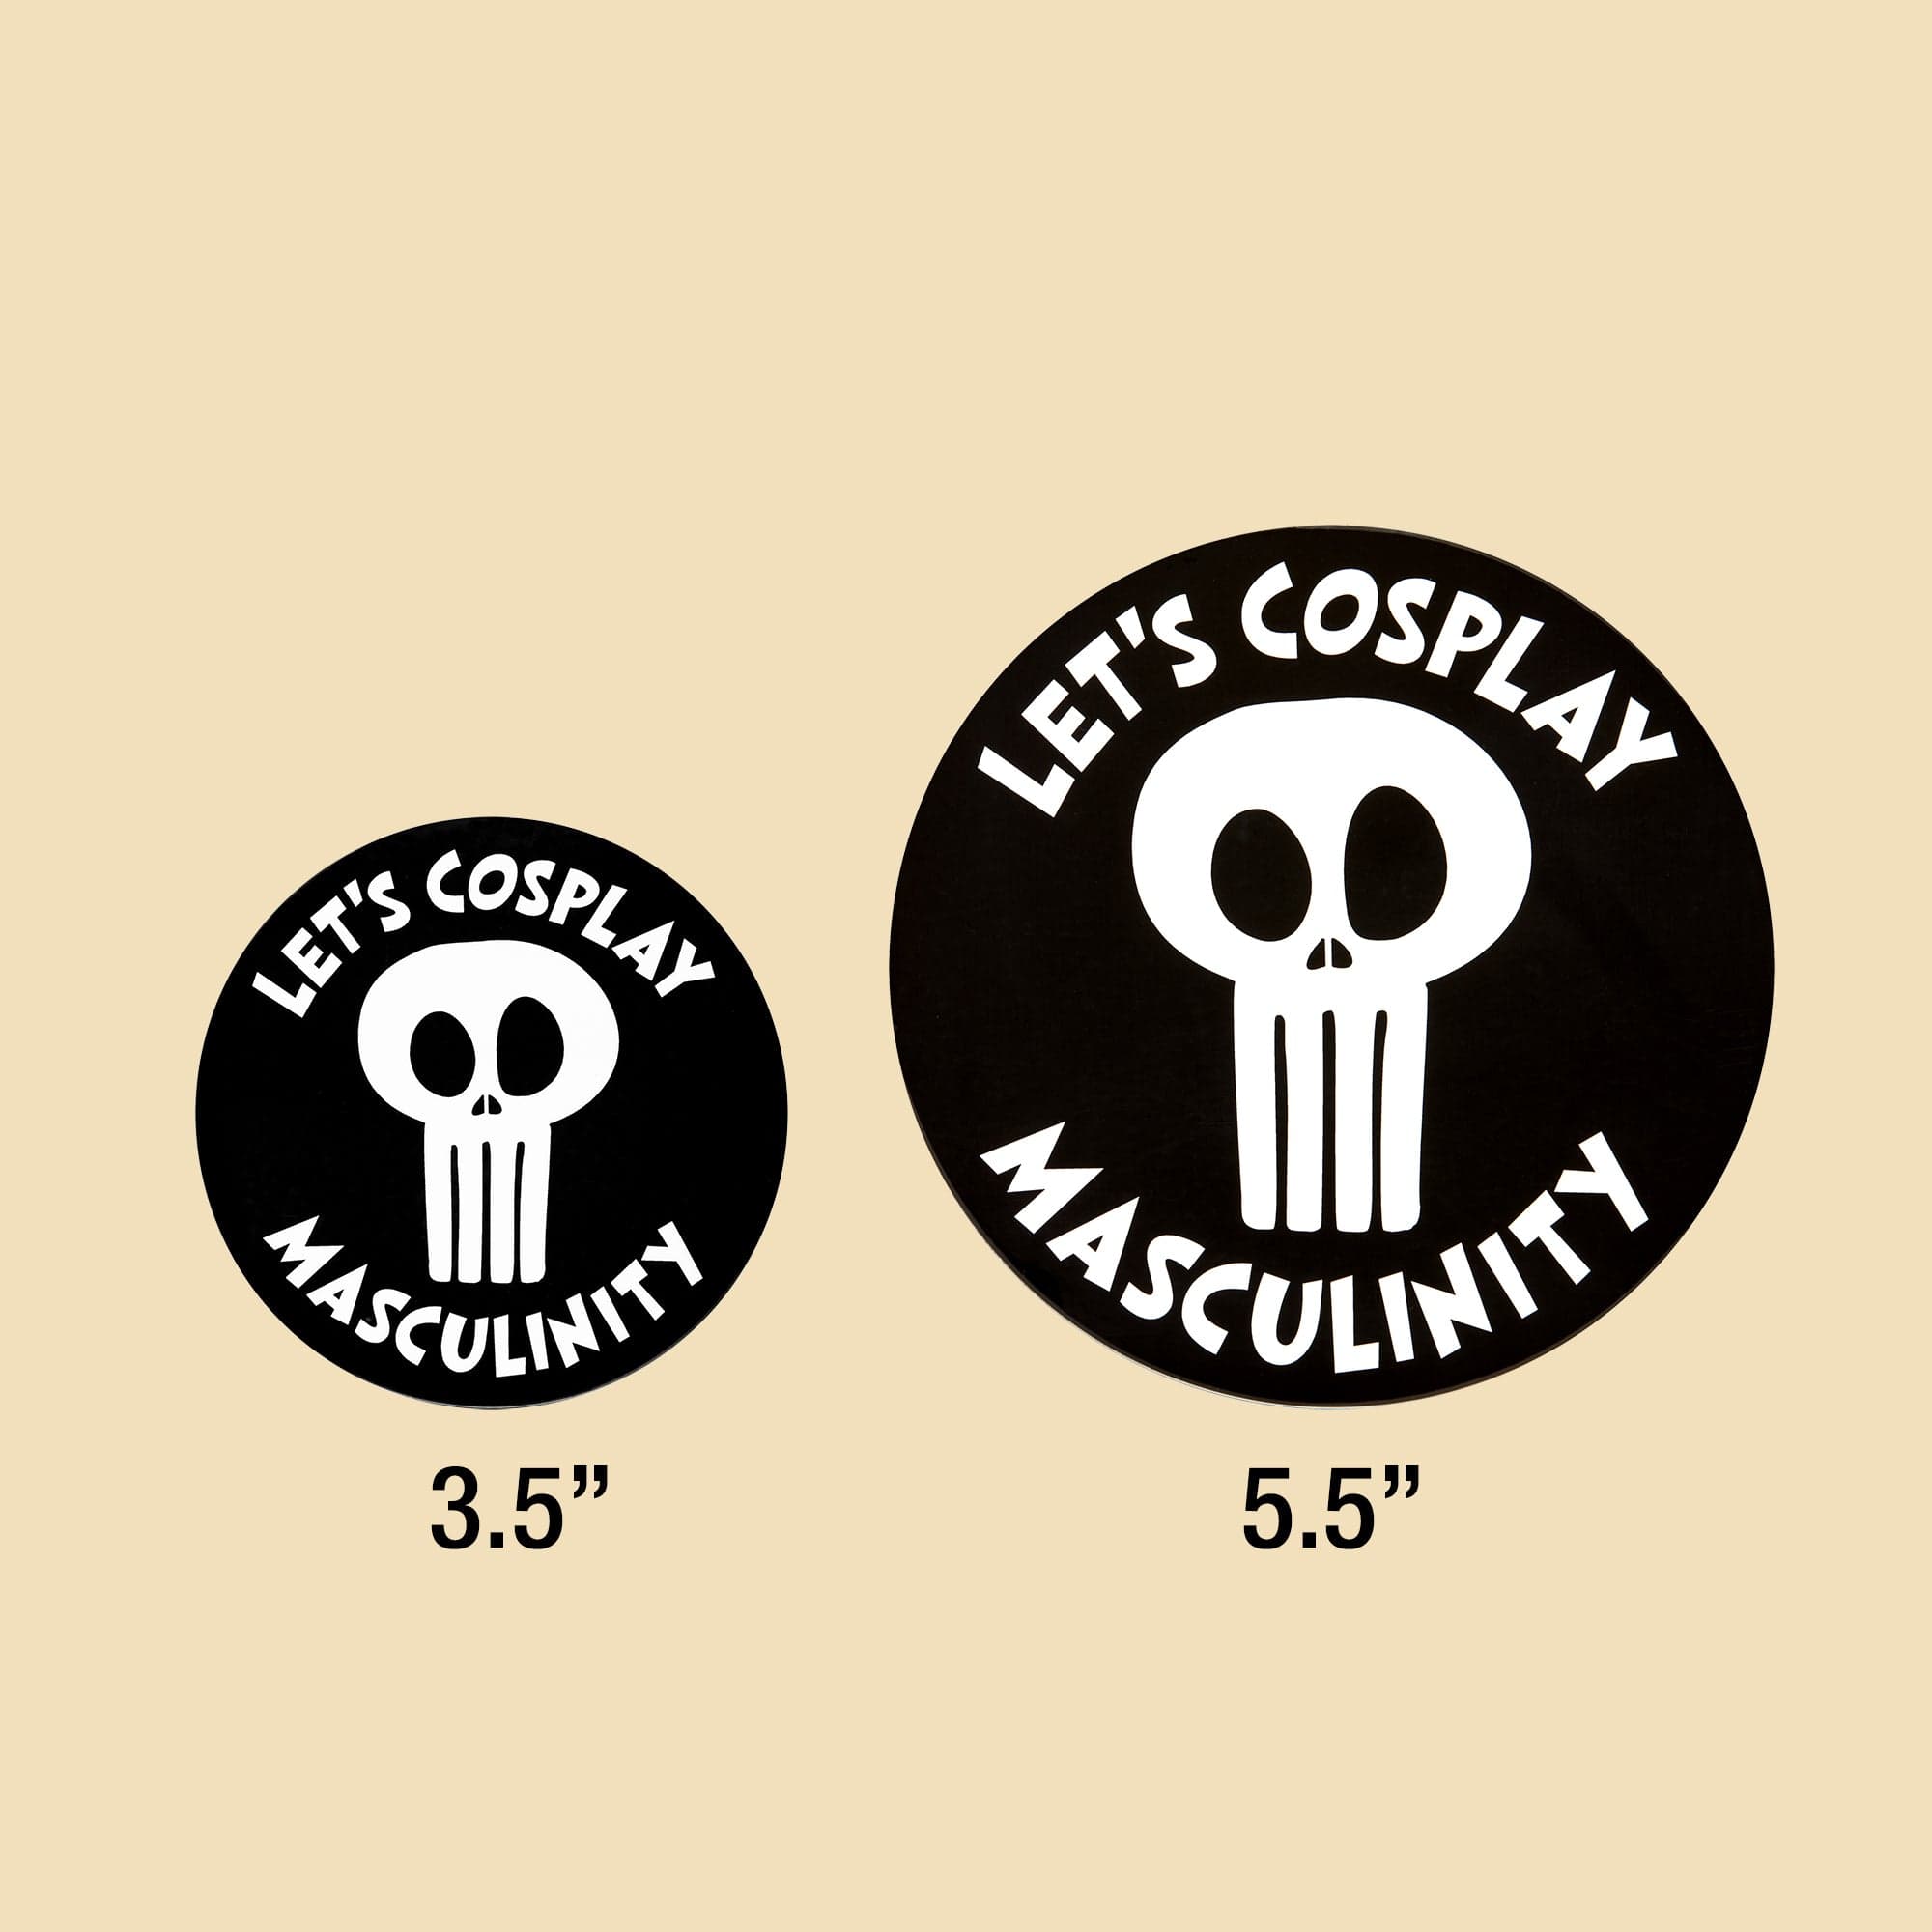 Let's Cosplay Masculinity - Sticker